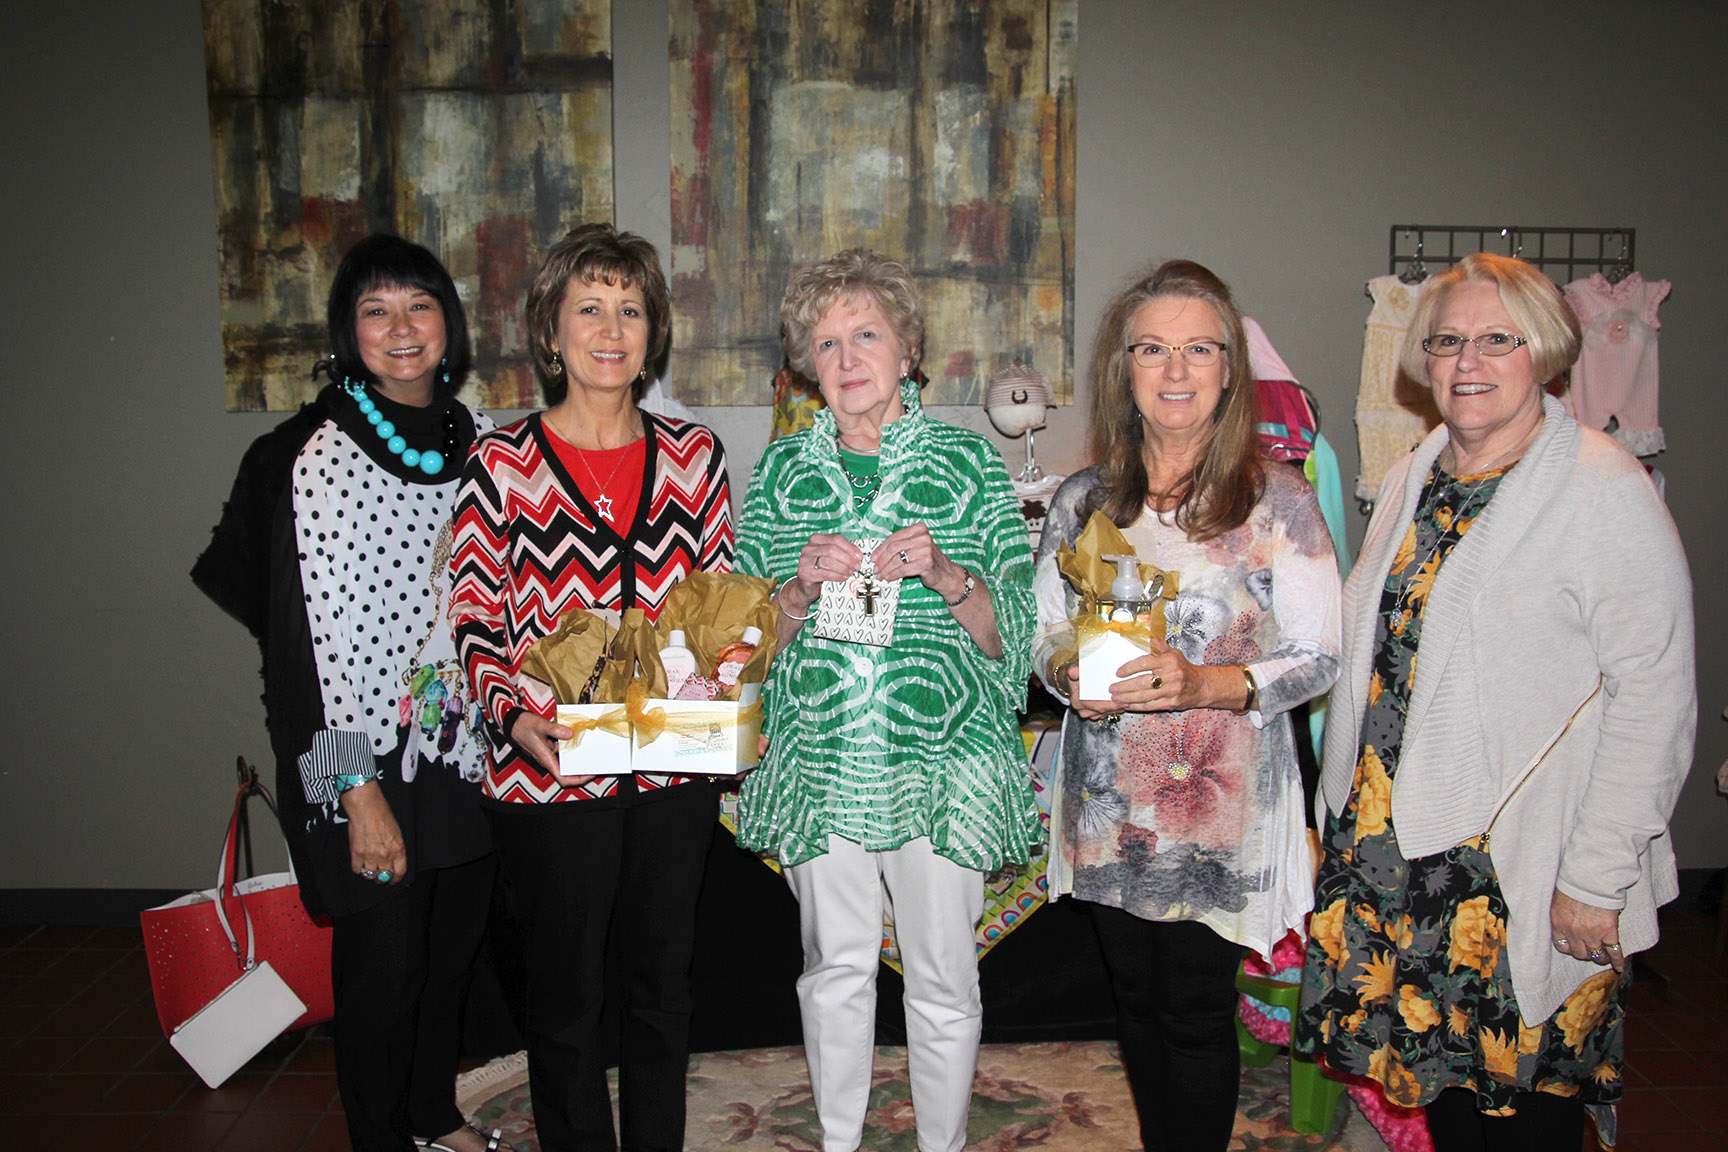 THREE WEST PLAINS RESIDENTS won giveaways at the Friends of the Garnett Library’s annual spring fashion show fundraiser Friday, April 28, at the West Plains Country Club, which was hosted by The Kloz Klozet and Cleea’s At Home Market. Beverly Linson, West Plains, received a Brighton cross key chain from The Kloz Klozet; Jan Greiner, West Plains, received a Michel Soaps bath and body gift pack from Cleea’s At Home Market; and Cheryl Caldwell, West Plains, received a Brighton star necklace from The Kloz Klozet and a Crabtree & Evelyn gift pack from Cleea’s At Home Market. From left are Florence James, owner of The Kloz Klozet; Caldwell; Linson; Greiner; and Cleea Walls, owner of Cleea’s At Home Market. Proceeds from the event will go toward creating a “huddle space” for group study in the library. (Missouri State-West Plains Photo)